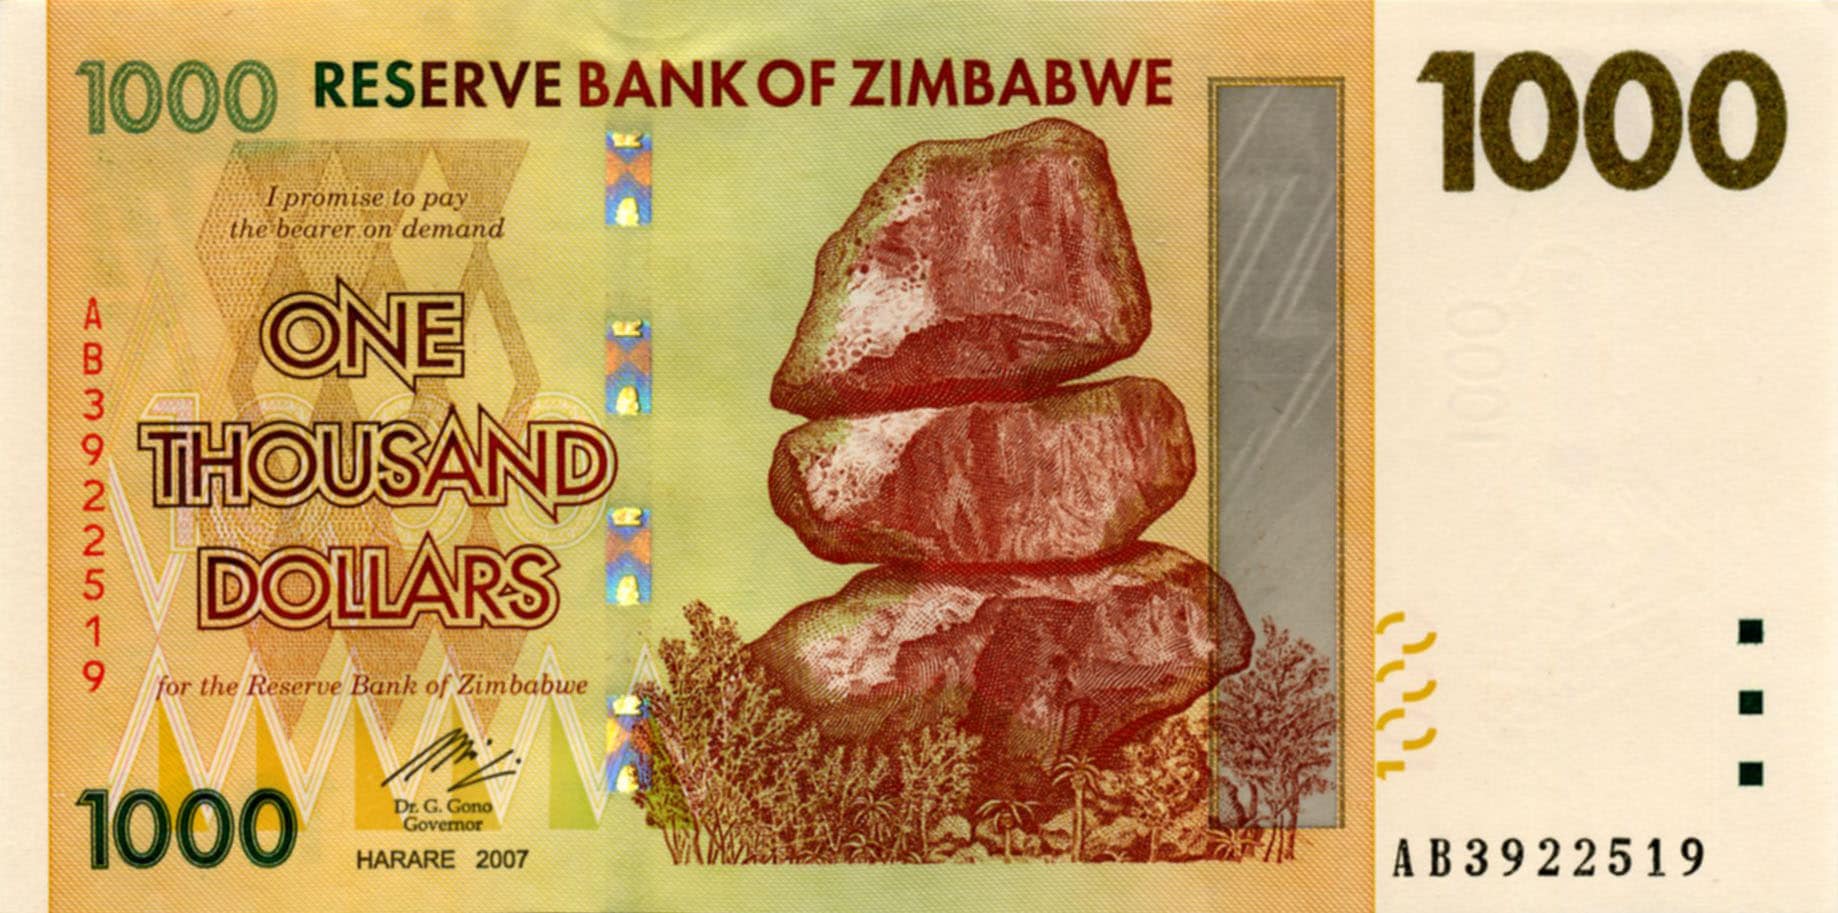 Zimbabwe lifts ban on bank lending it imposed to stop currency slide￼